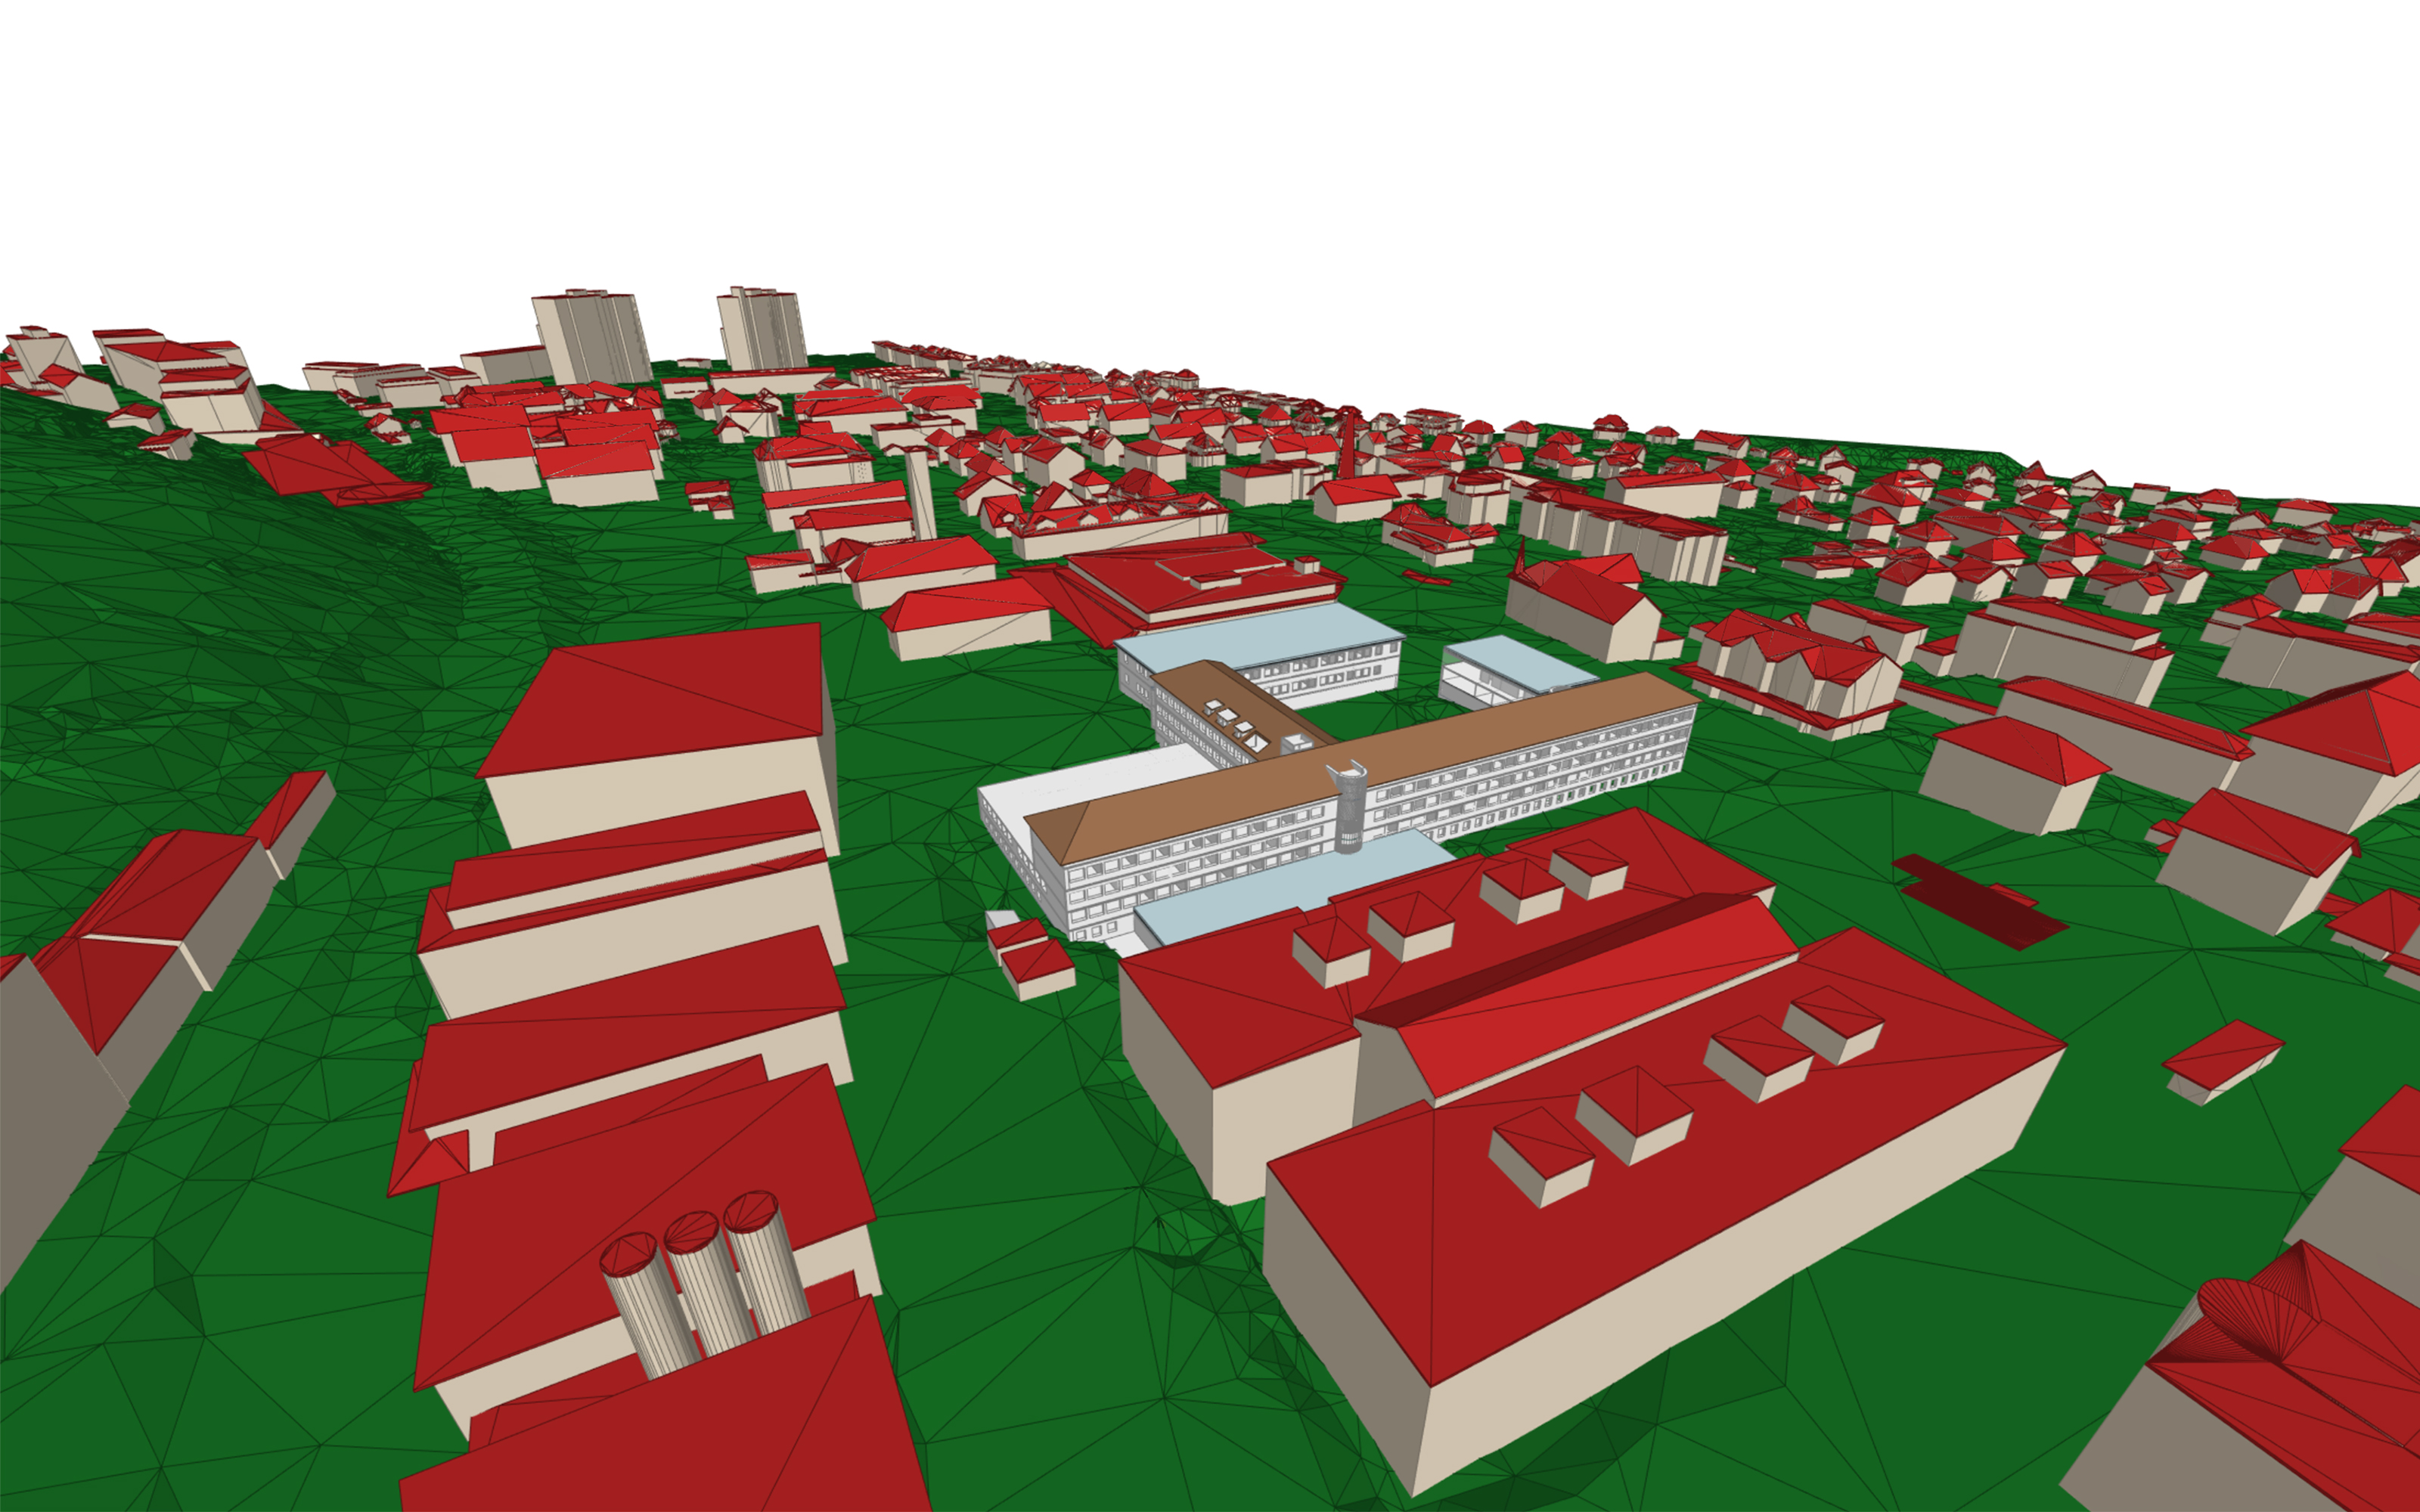 The image shows the building and terrain as IFC combined with the BIM model of the swisstopo headquarters in Wabern.